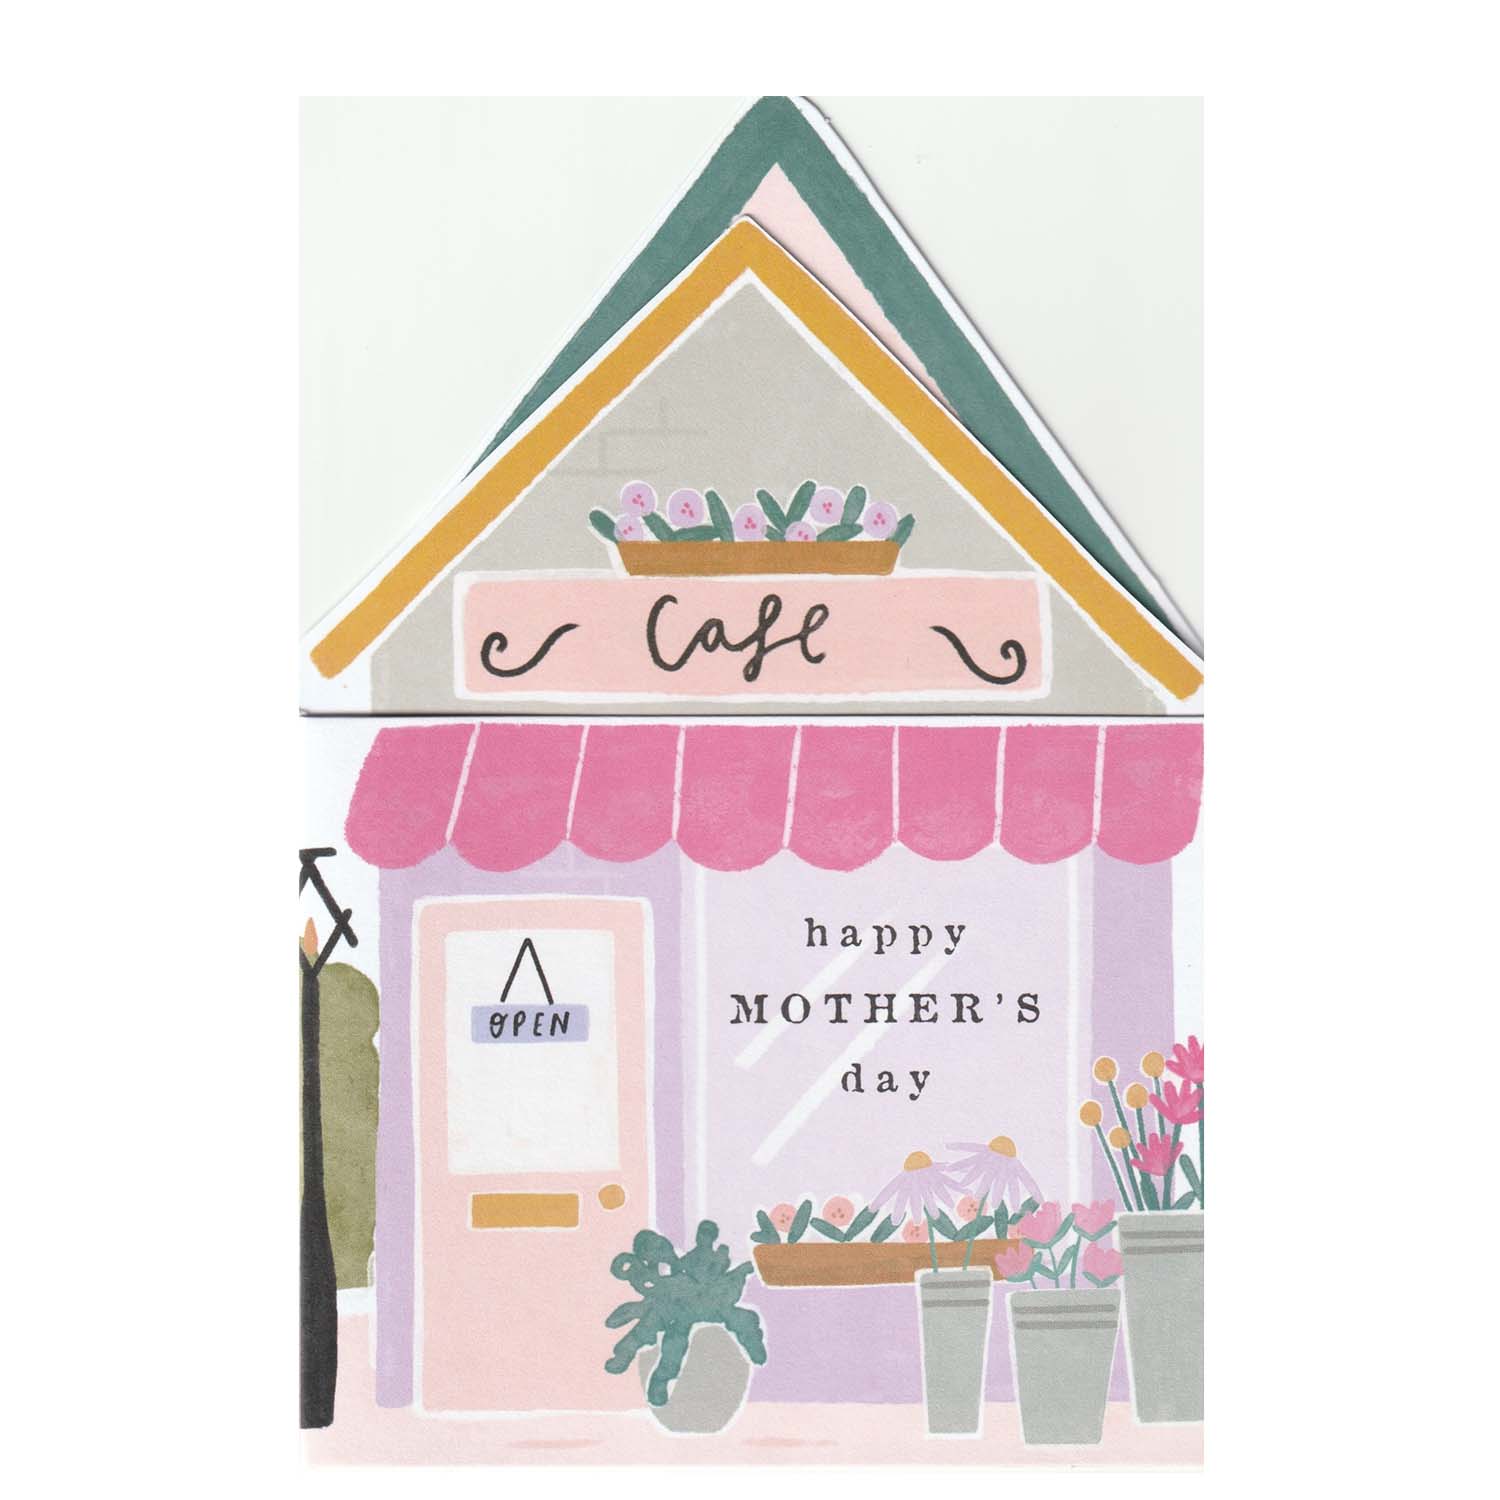 Happy Mothers Day Open Shops Greeting Card